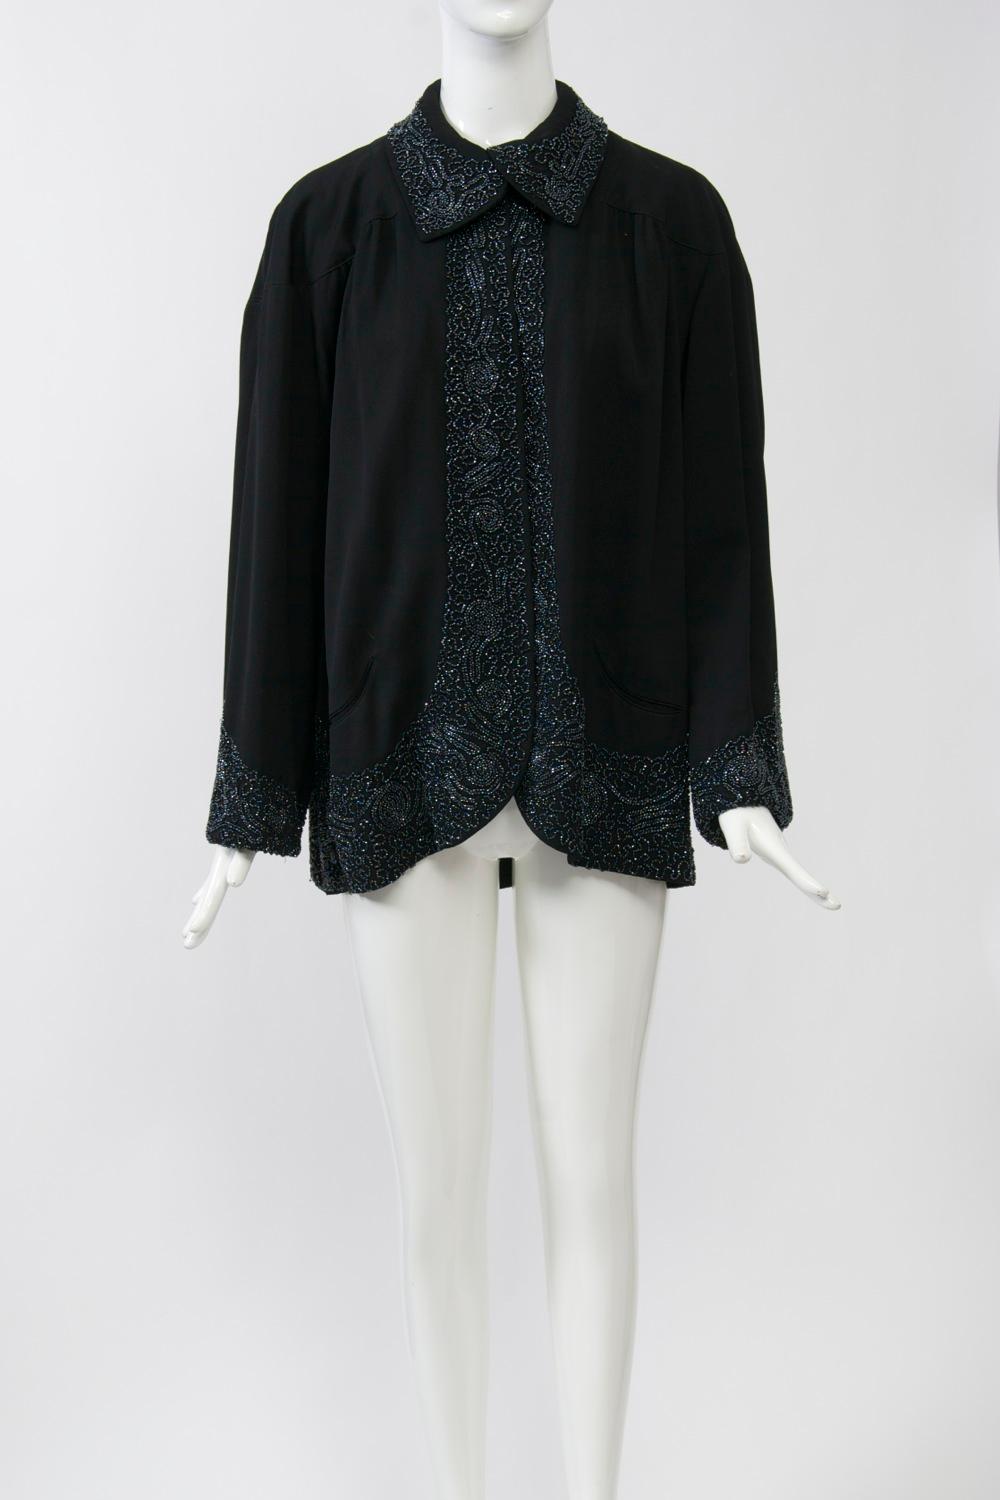 1940s black wool jacket with beaded trim on collar, cuffs, and border. The intricate beaded design follows the curve of the hem, widening as it descends, and features a scalloped design throughout the swing back. A set-in yoke follows the same shape